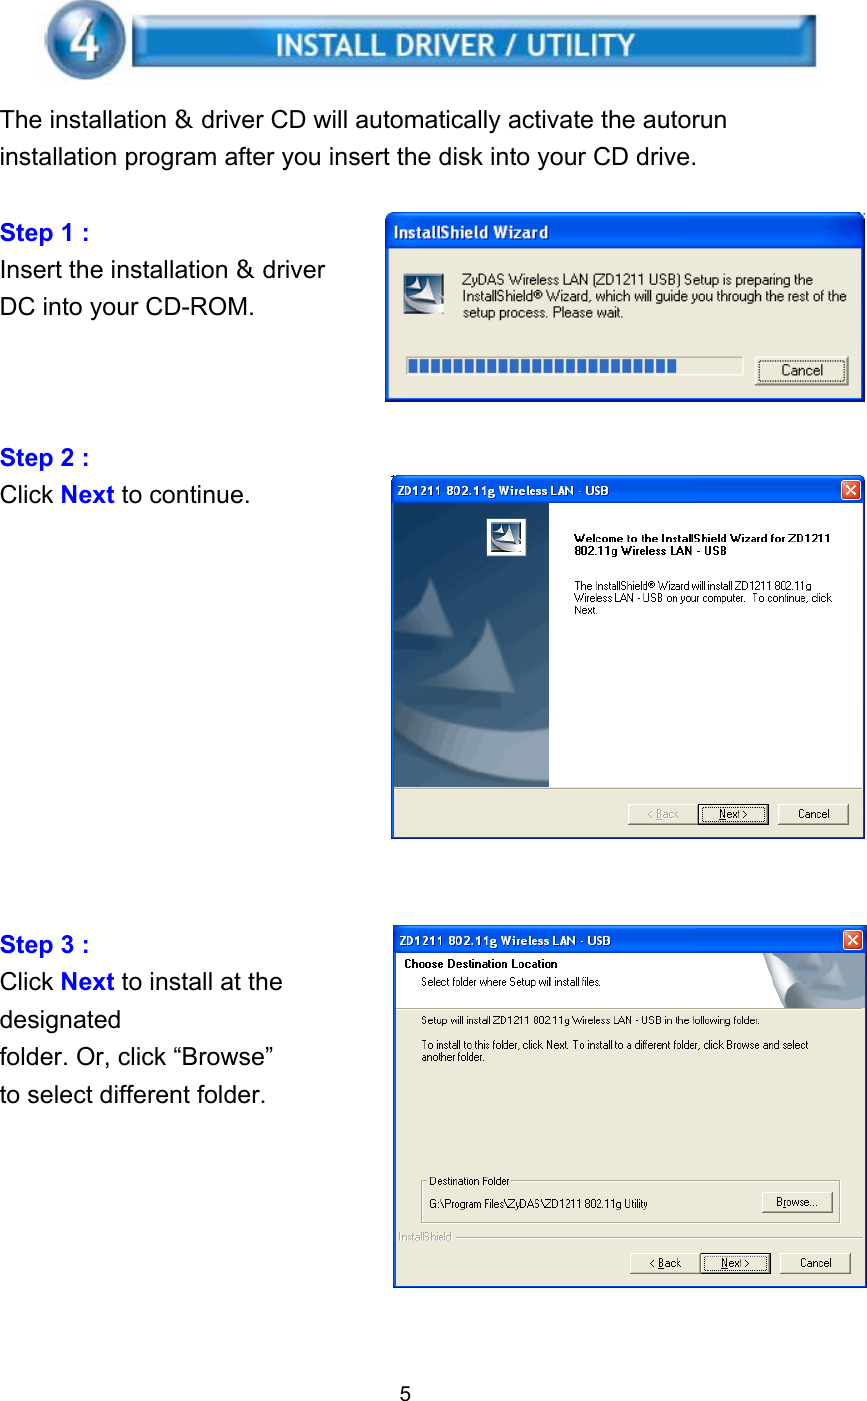    The installation &amp; driver CD will automatically activate the autorun installation program after you insert the disk into your CD drive.  Step 1 :   Insert the installation &amp; driver DC into your CD-ROM.    Step 2 :   Click Next to continue.            Step 3 :   Click Next to install at the designated folder. Or, click “Browse” to select different folder.        5 